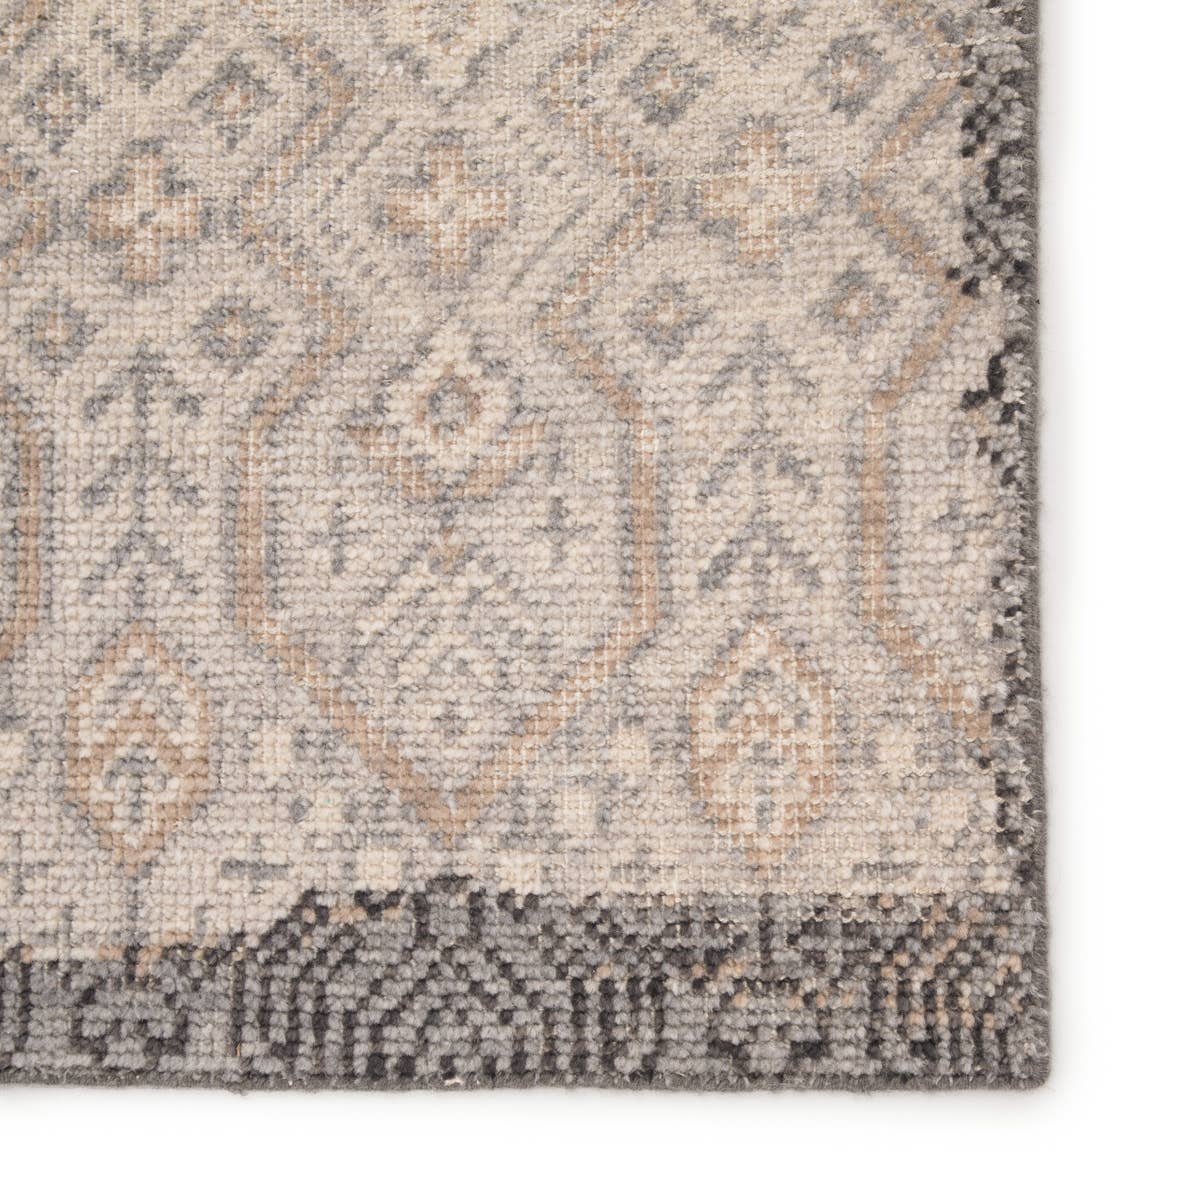 The Revolution collection is inspired by traditional style and beautifully detailed antique textile designs. The hand-knotted Prospect area rug showcases a captivating geometric design in muted tones of gray and gold. A charcoal edge creates a unique border effect around this globally inspired wool rug.  Hand-Knotted 100% Wool REL10